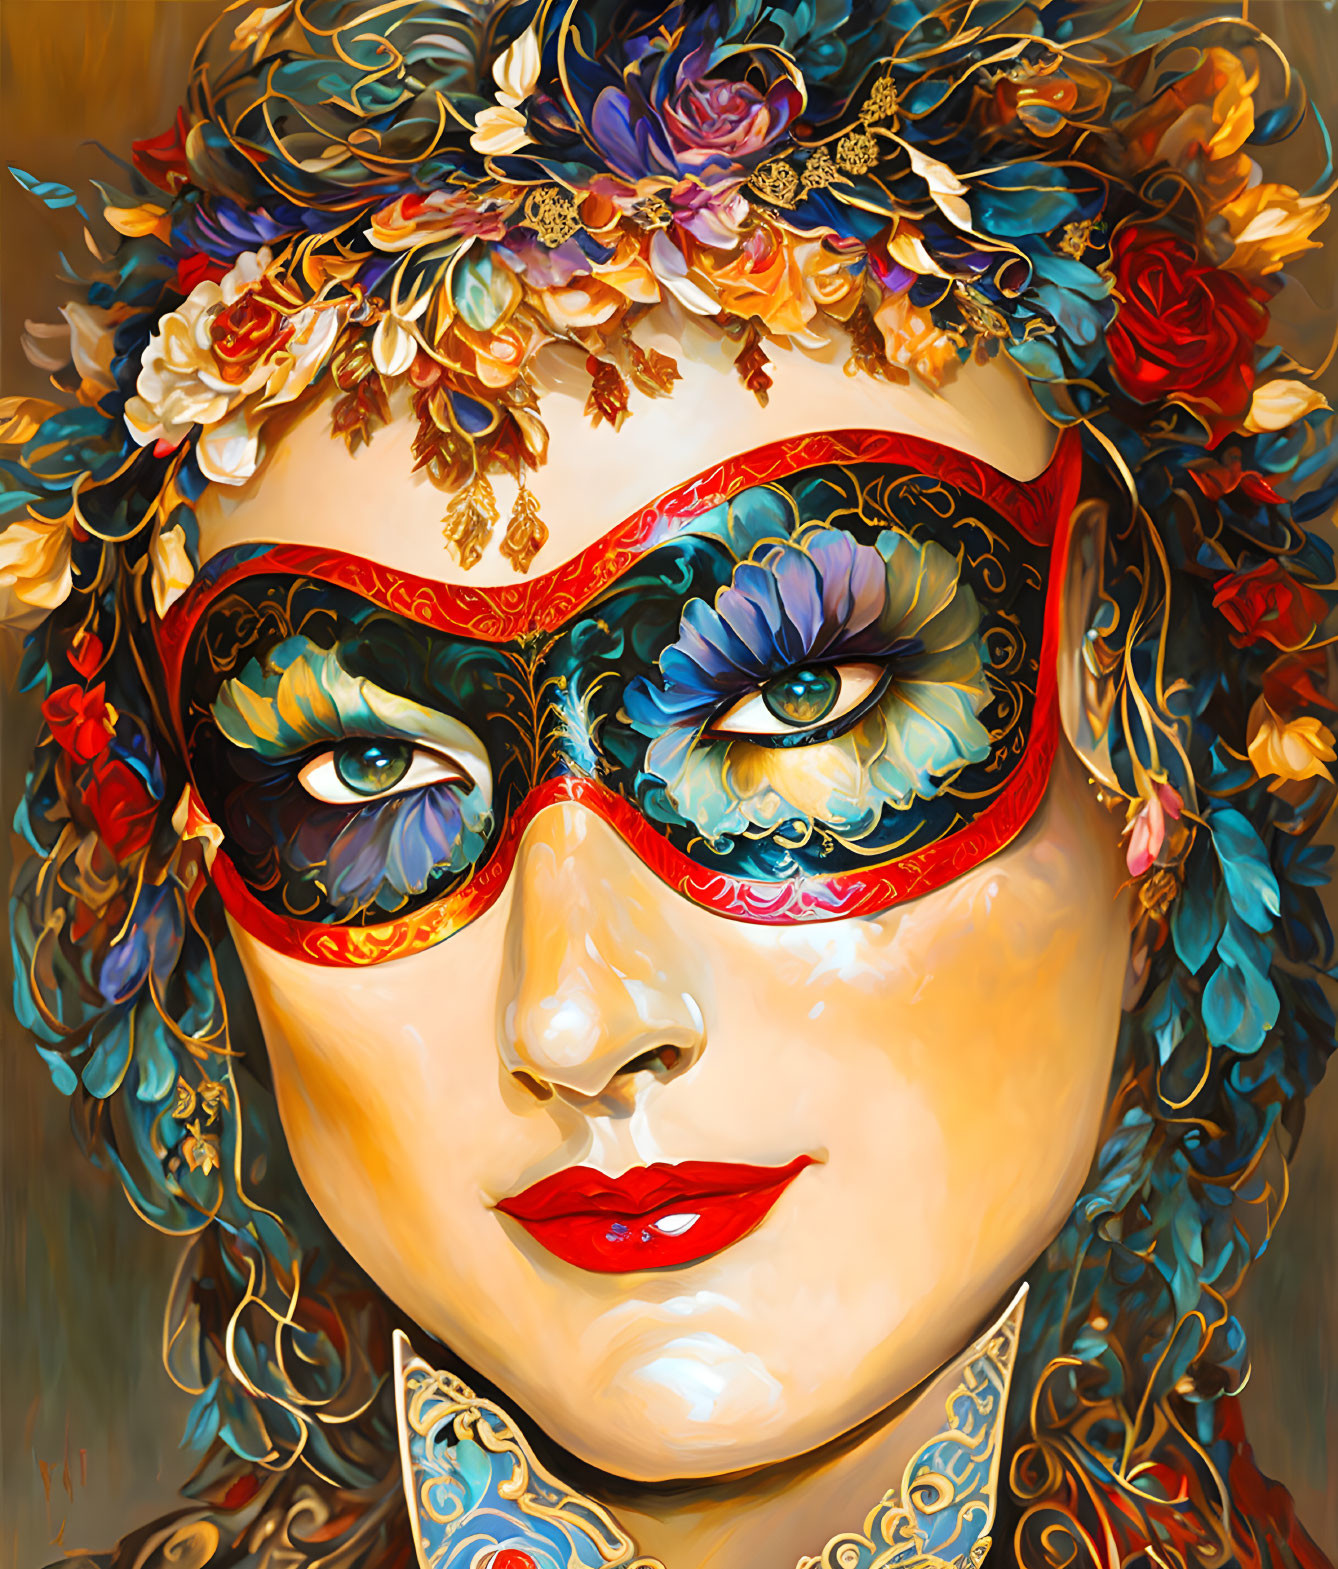 Colorful painting of woman with floral wreath & ornate masquerade mask